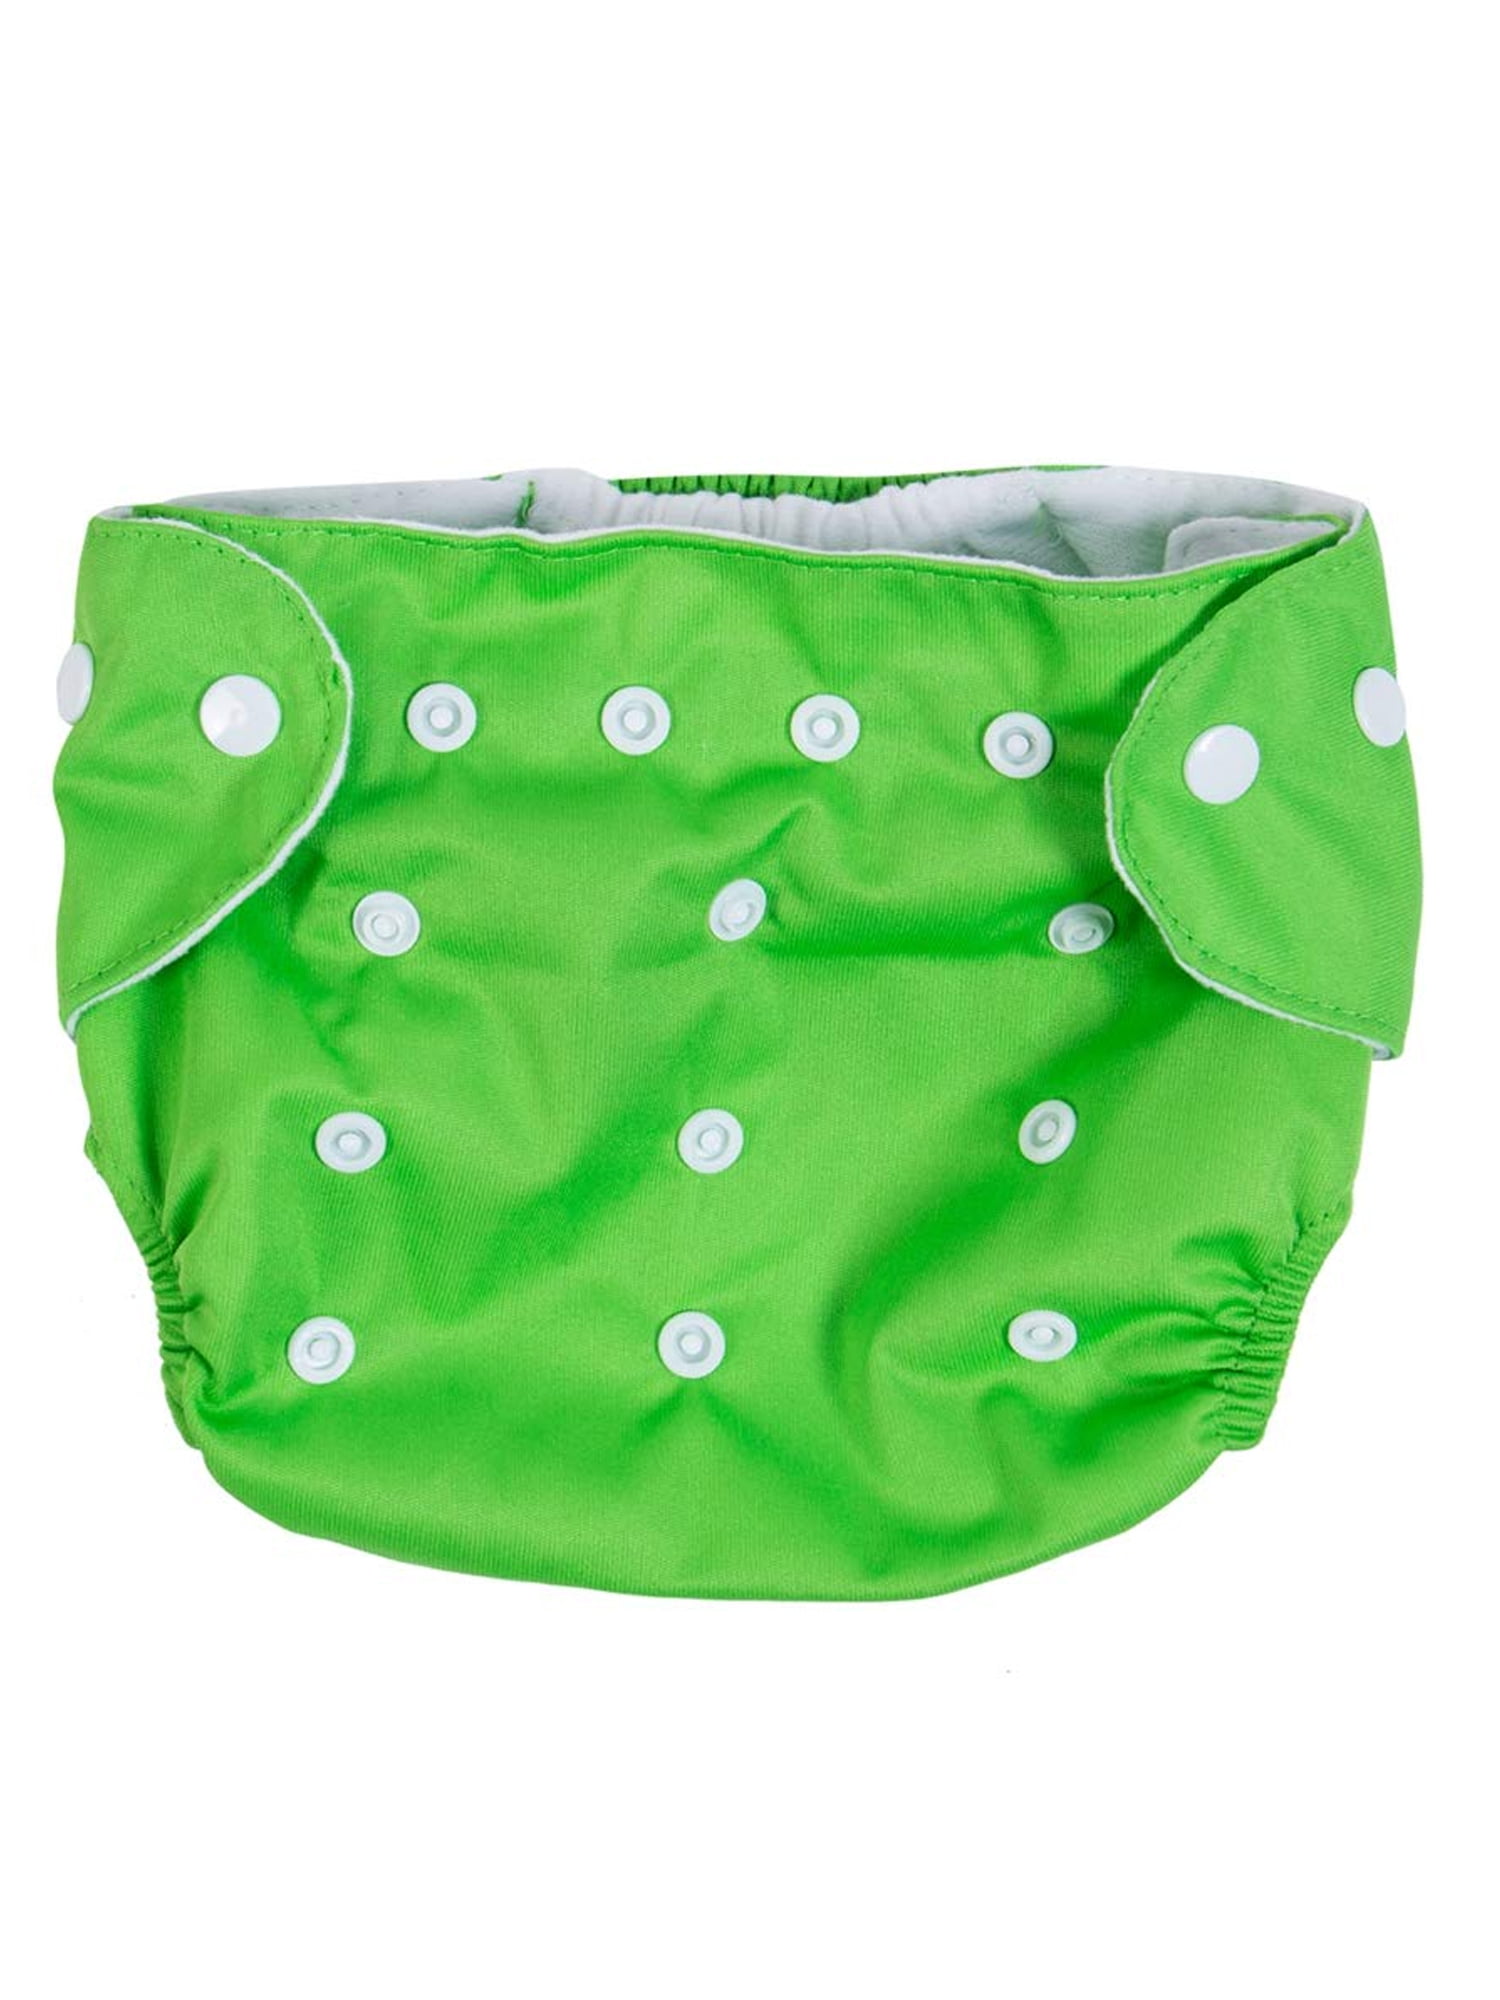 2018 NEWBORN Cloth Diaper Cover Baby Nappy Reusable 8-10lbs 2 Gusset Pineapple 